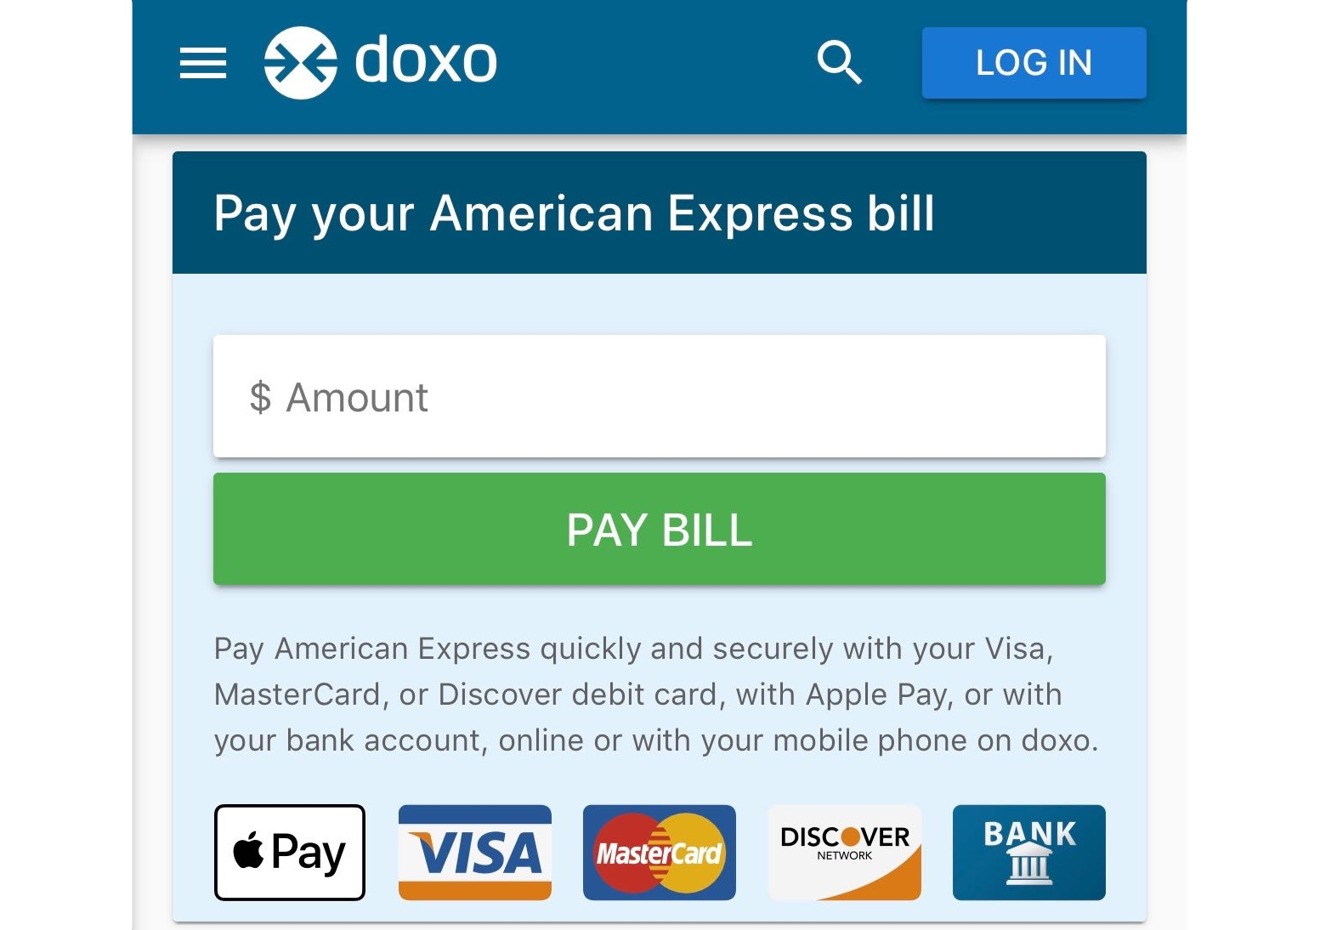 Bill payment app doxo adds Apple Pay option to pay 45,000 services1320 x 930